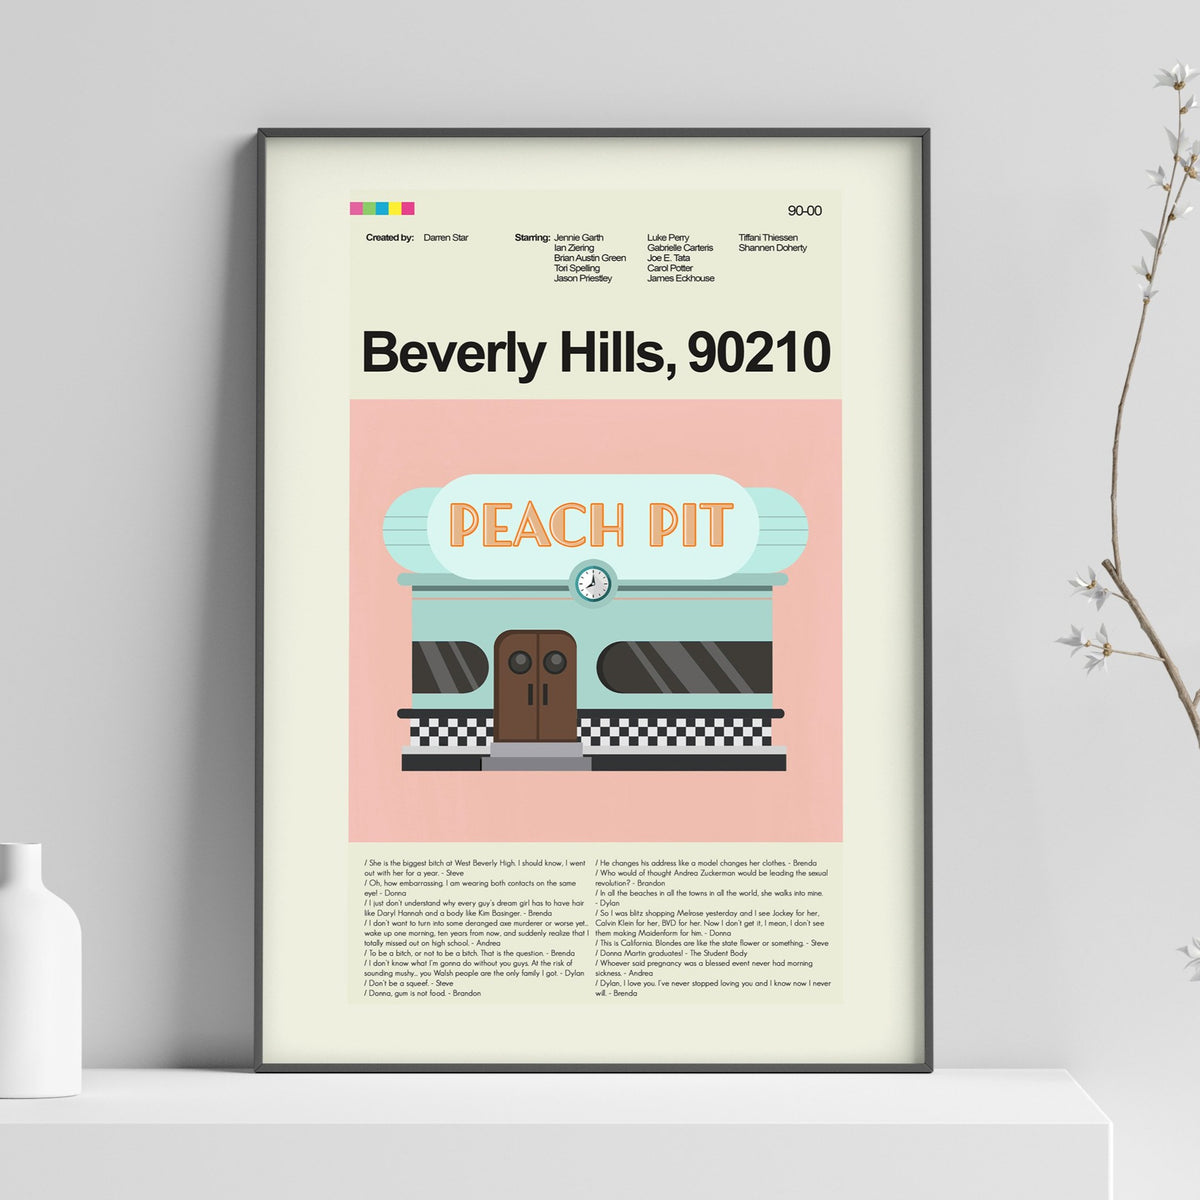 Beverly Hills, 90210 - The Peach Pit  | 12"x18" or 18"x24" Print only